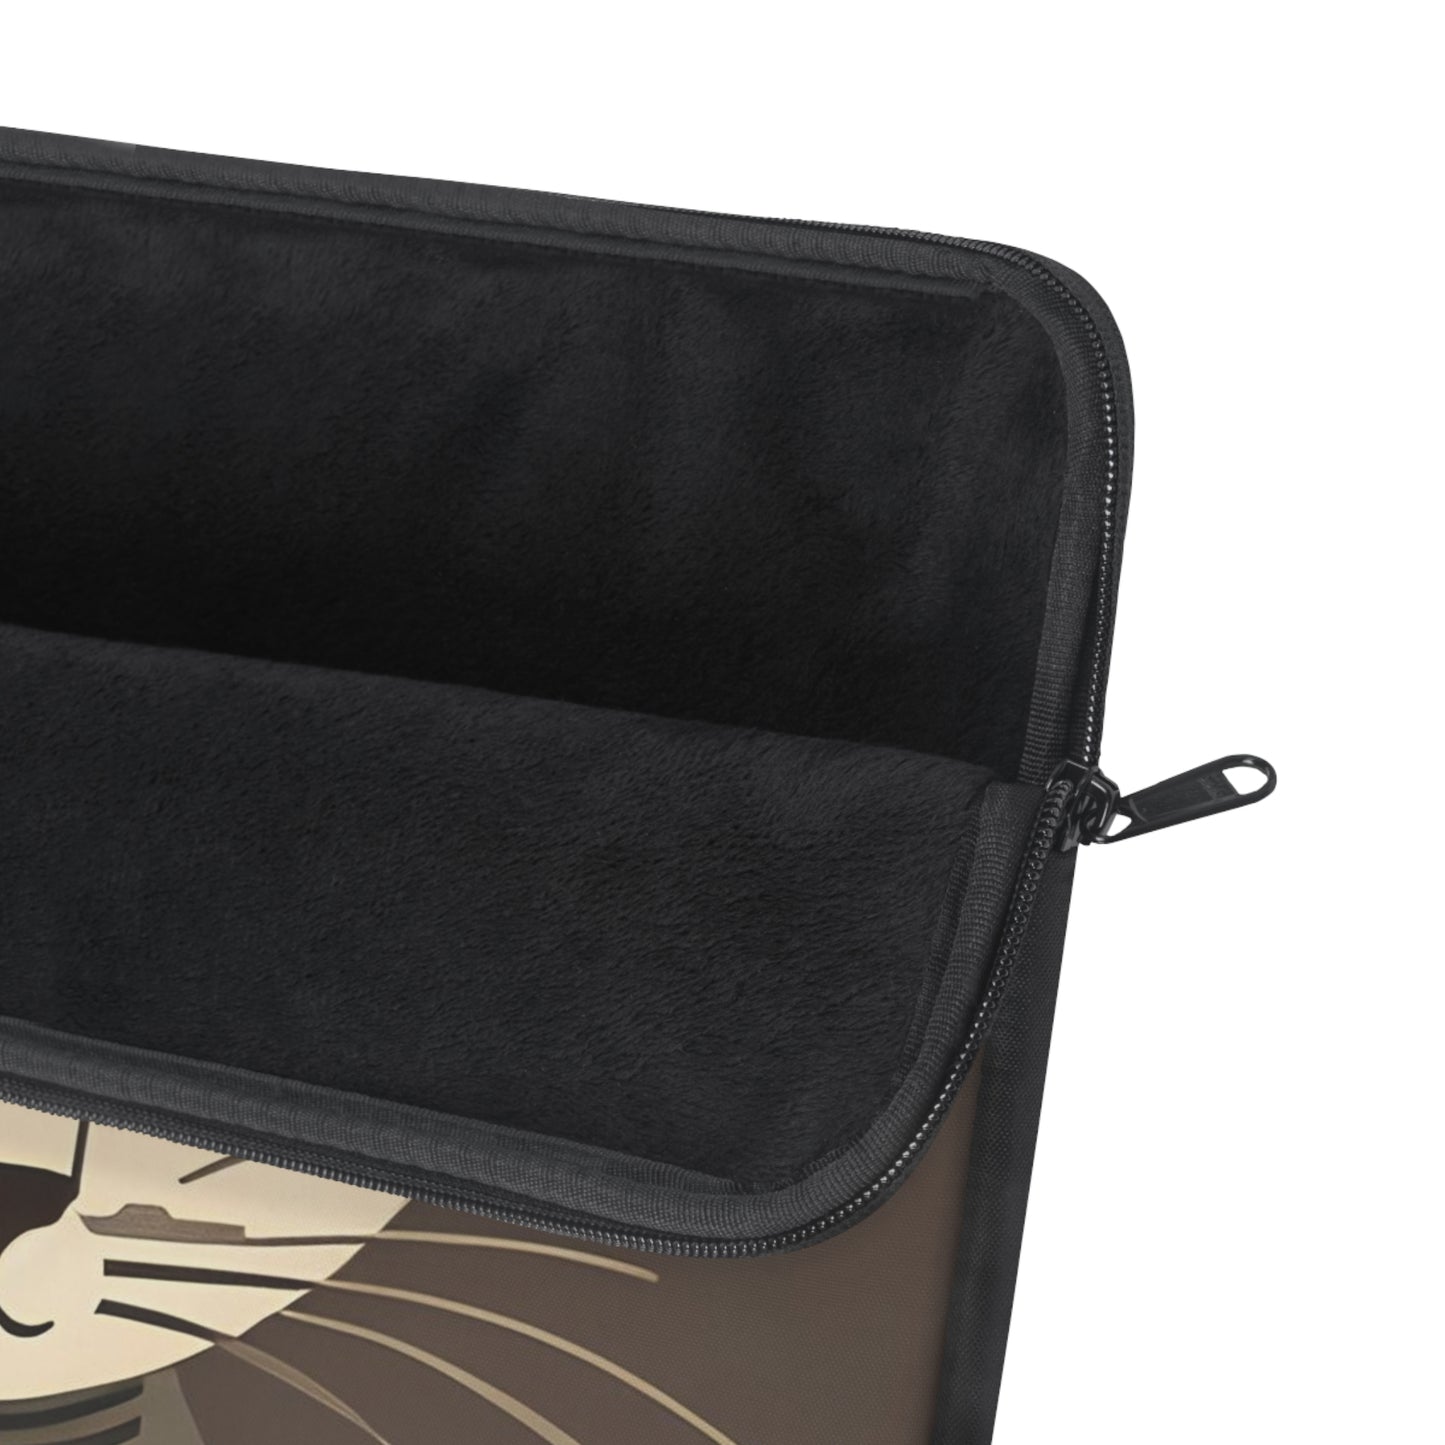 Art Deco Cat, Laptop Carrying Case, Top Loading Sleeve for School or Work